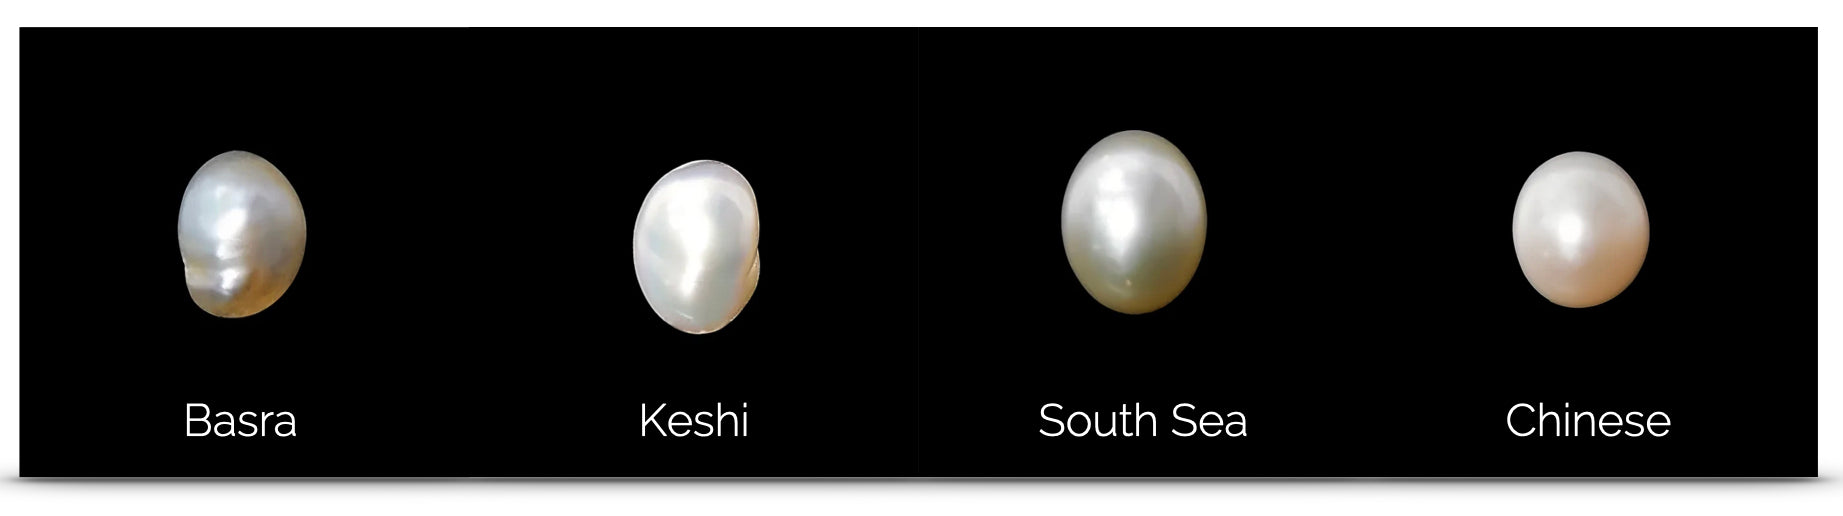 The different types of pearls including Keshi, South Sea, Basra, and Chinese